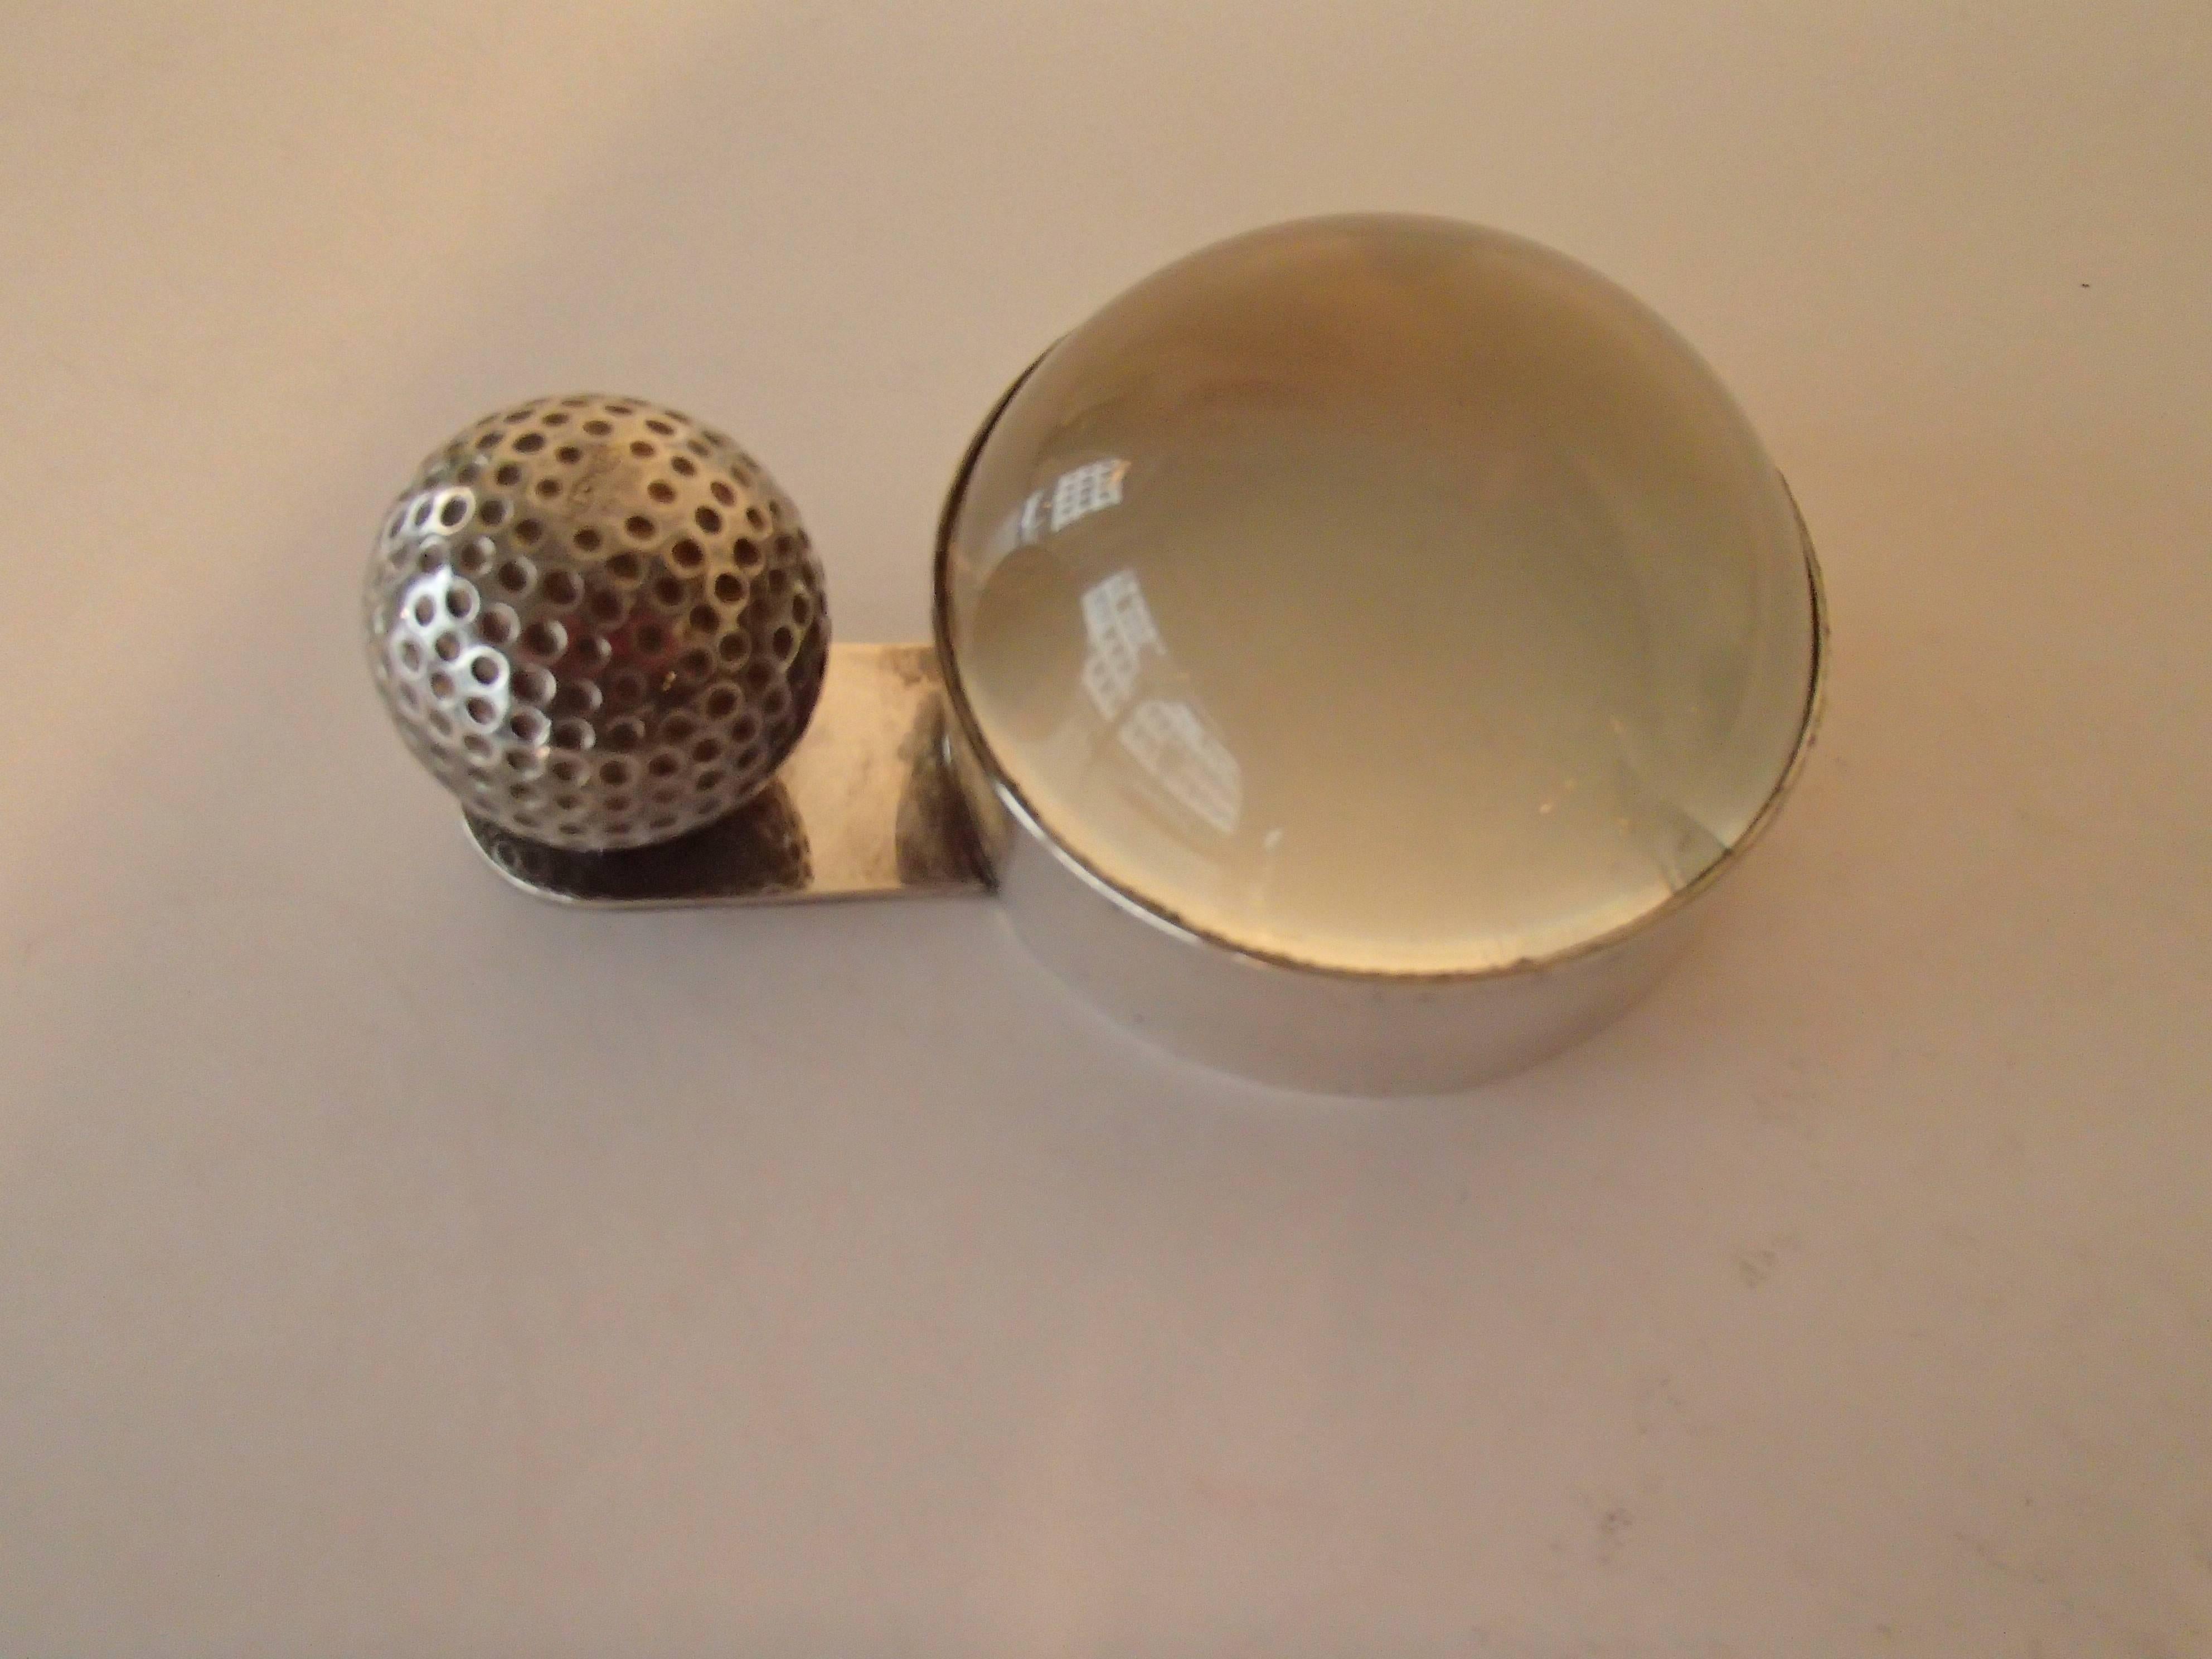 French Hermes Paris Silver Plated Golf Ball Magnifying Glass